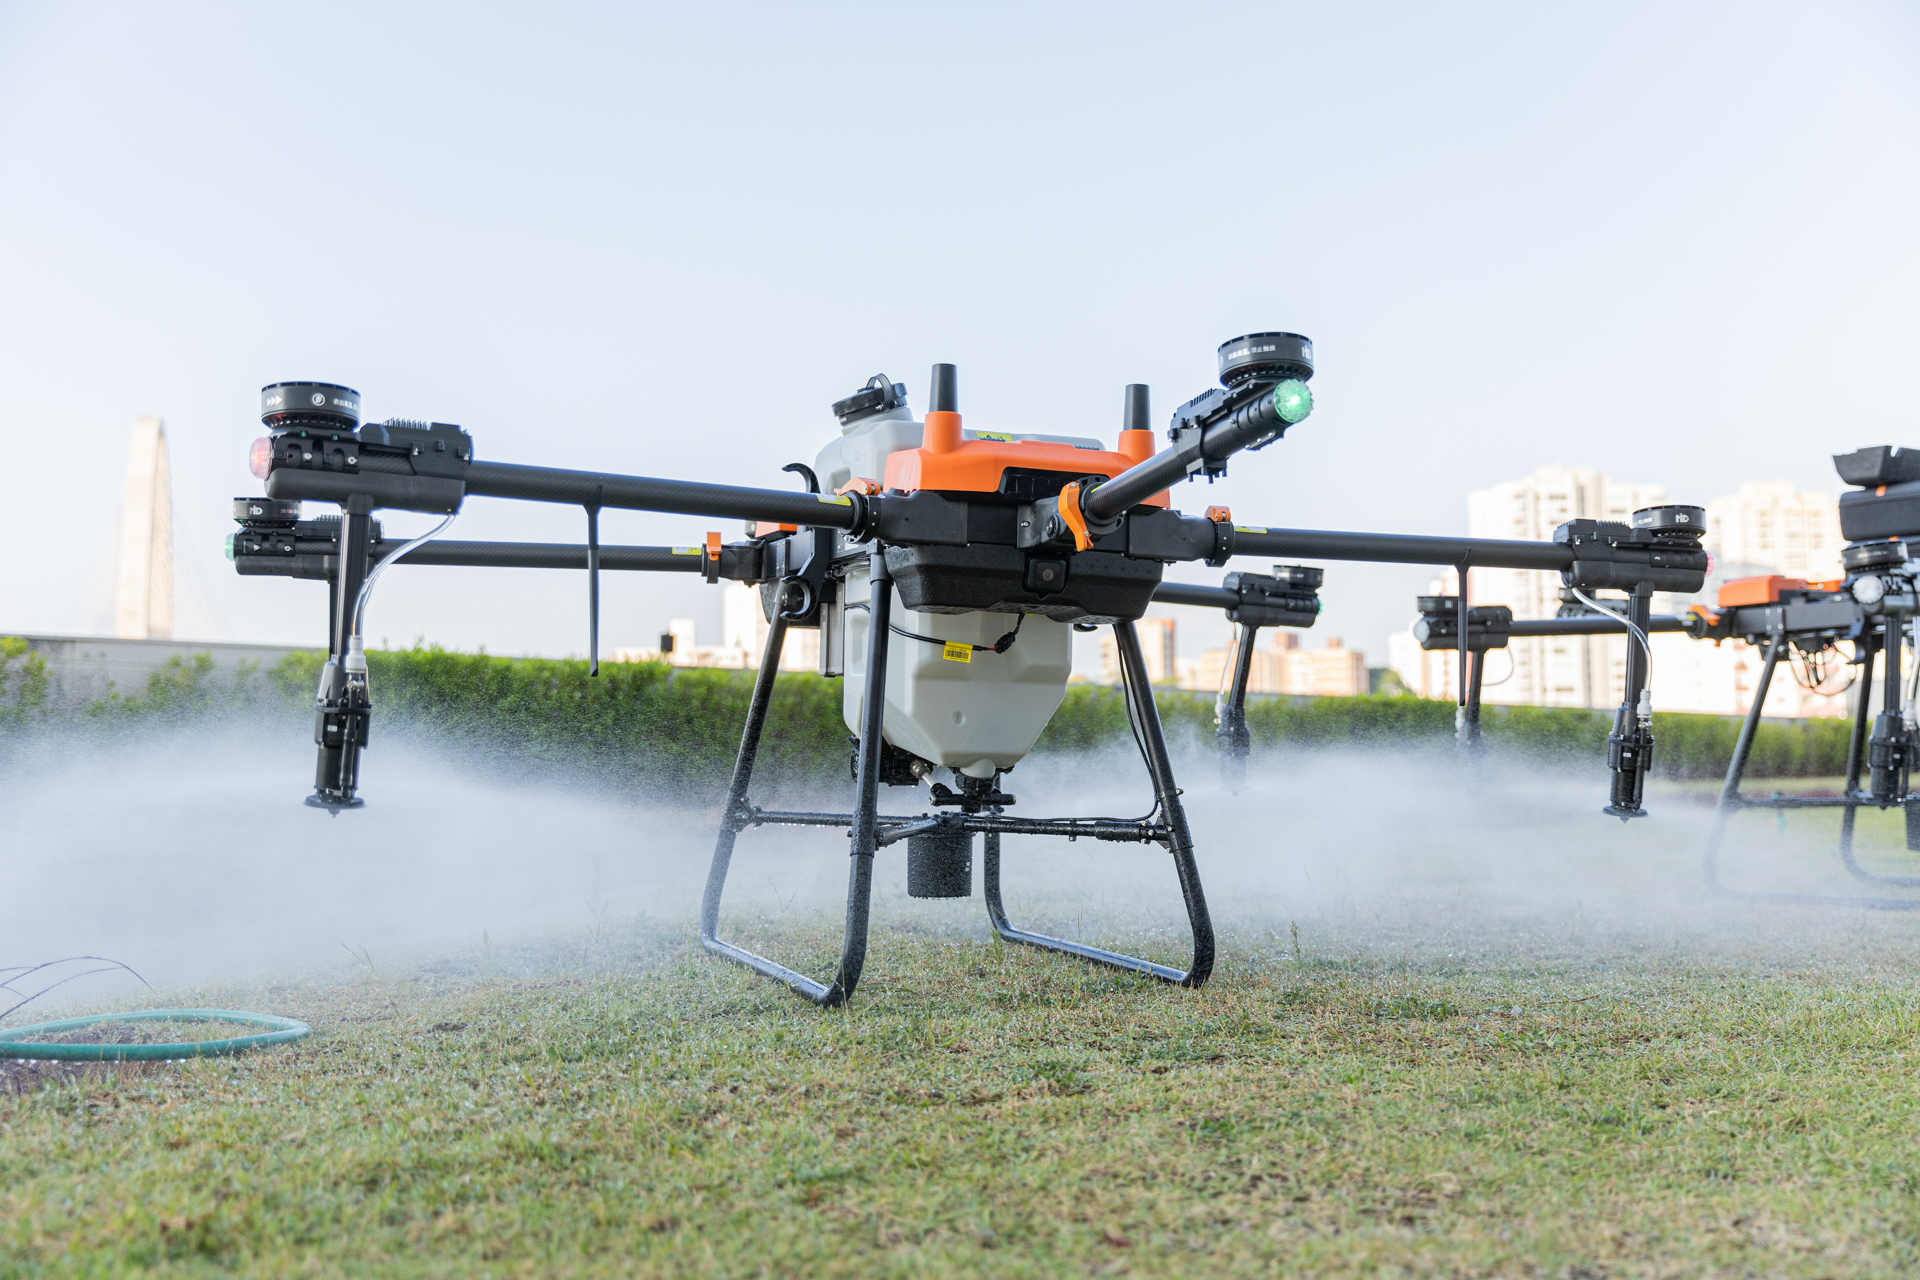 Prospects of the Agricultural Drone Market: Cultivating a High-Flying Future